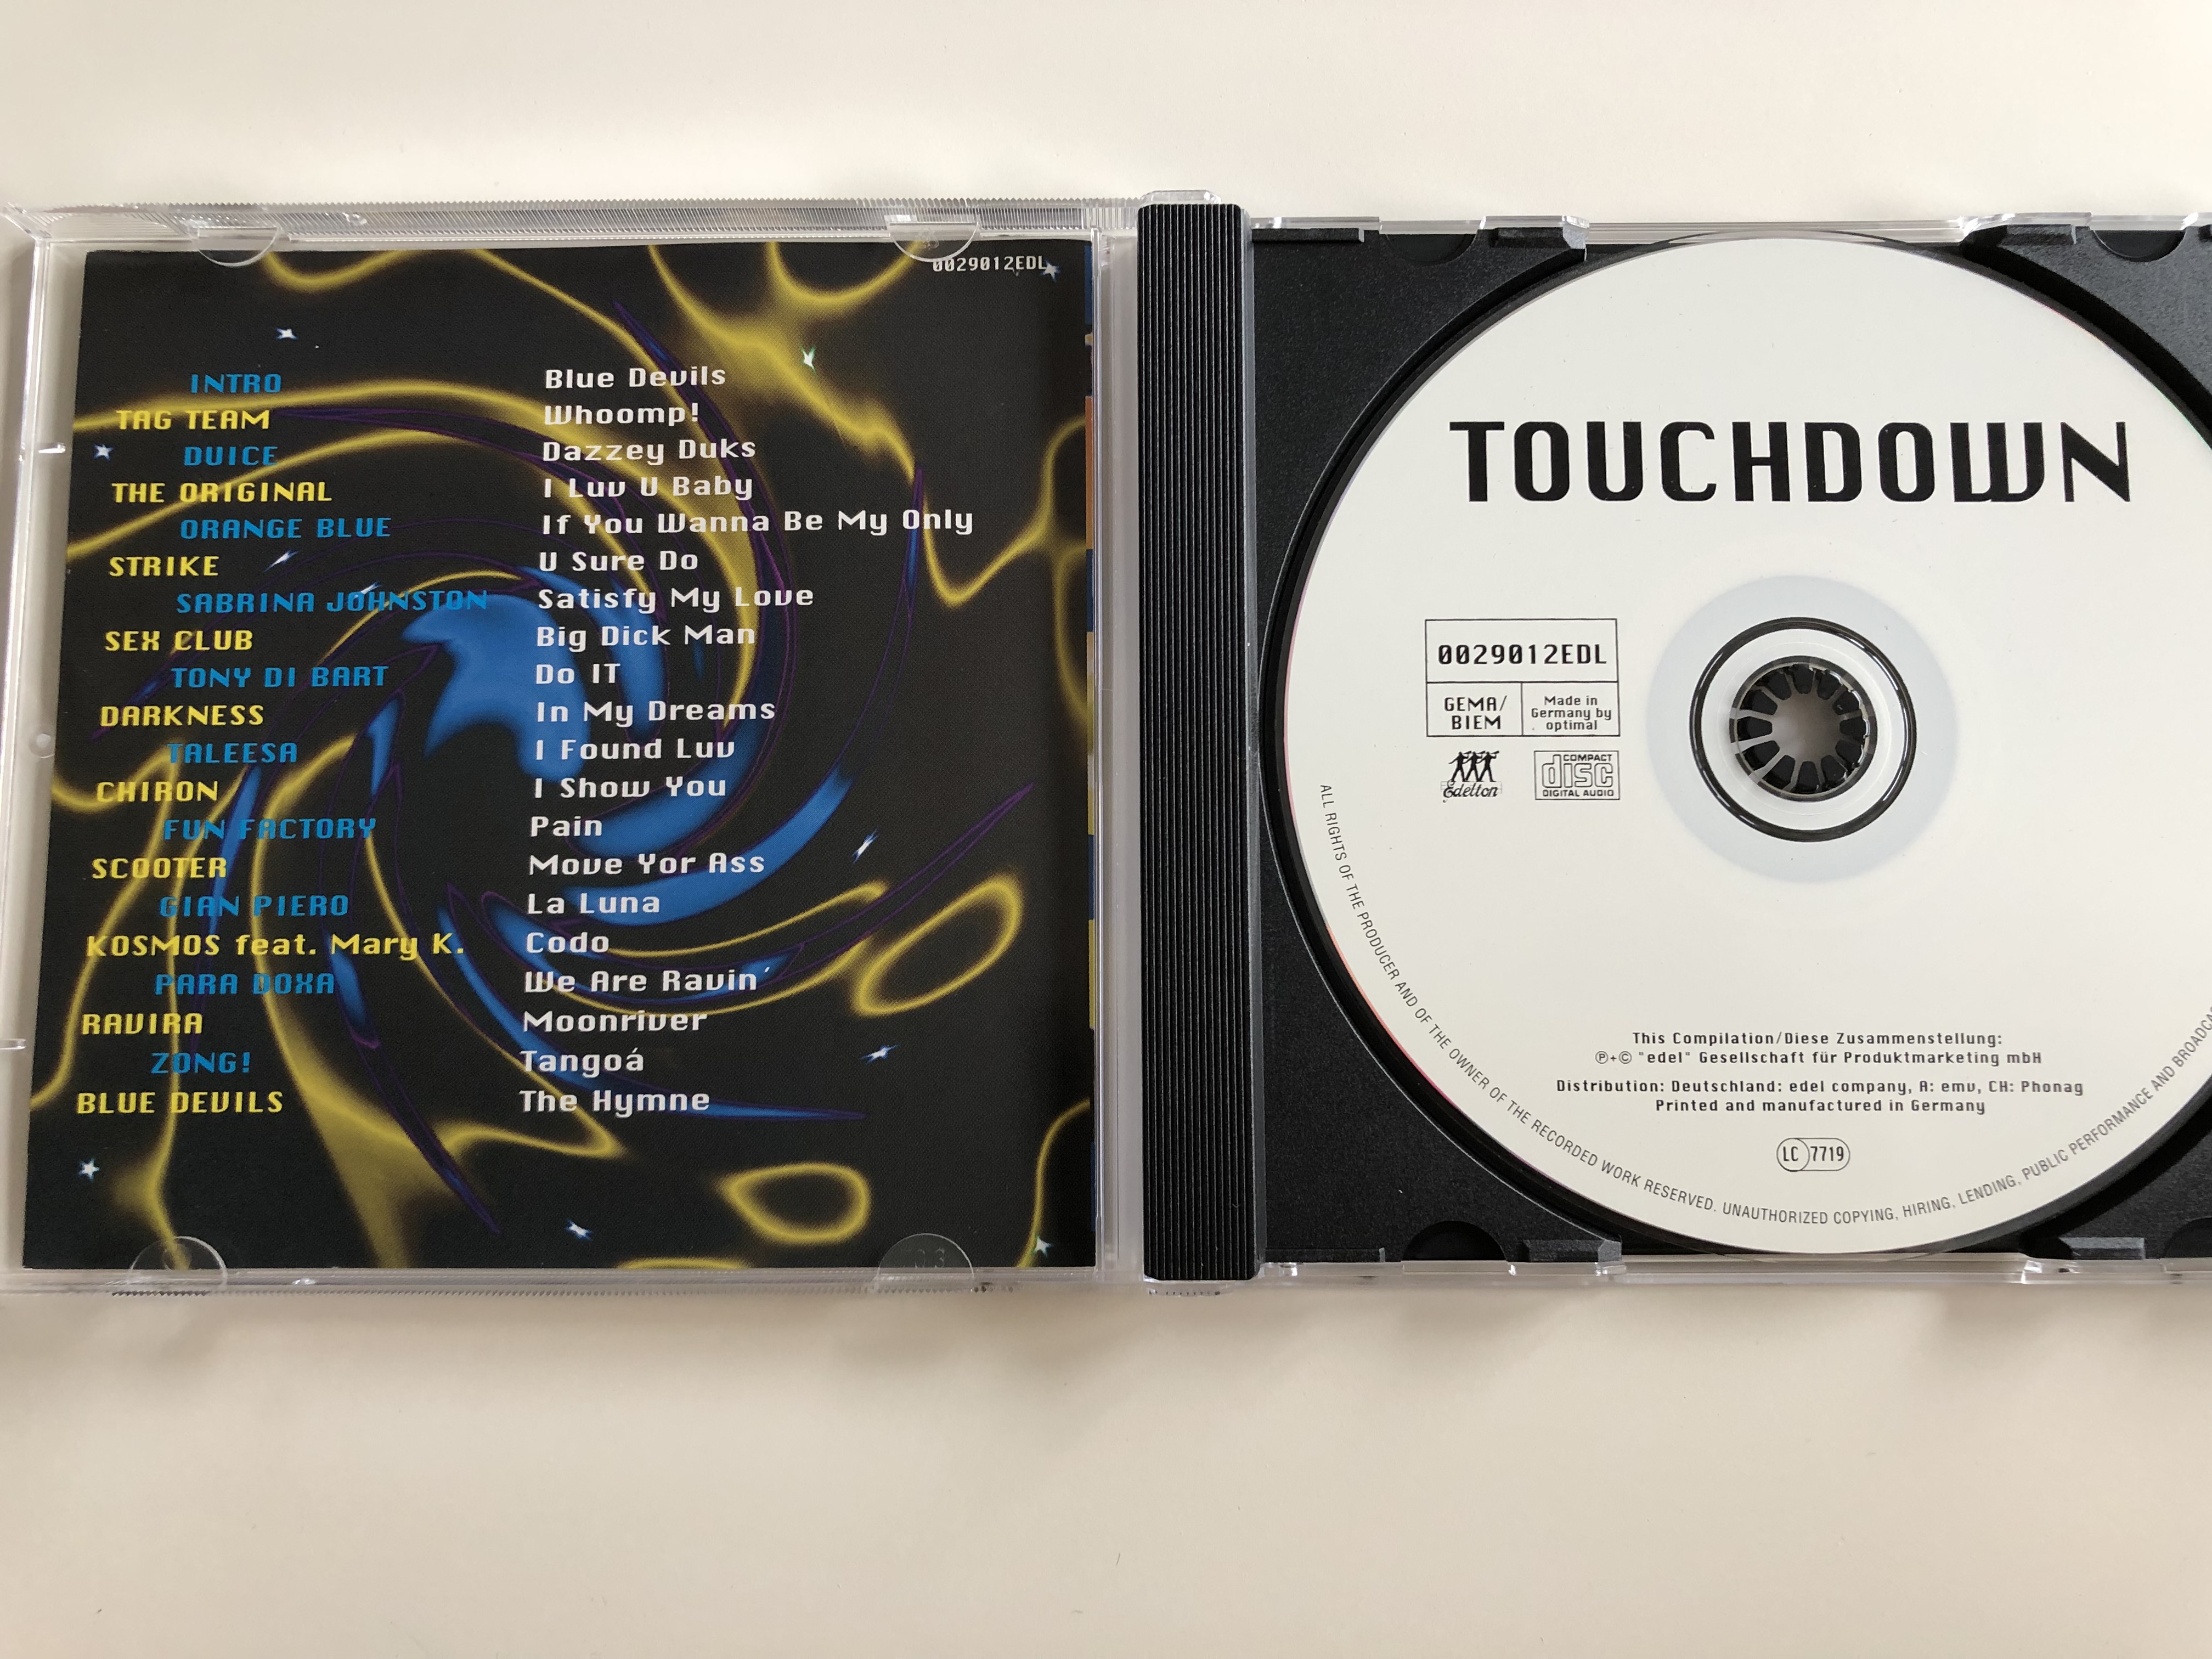 touchdown-fun-factory-scooter-tag-team-darkness-tony-di-bart-orangle-blue-para-doxa-only-available-on-this-compilation-blue-devils-hymne-audio-cd-1995-3-.jpg